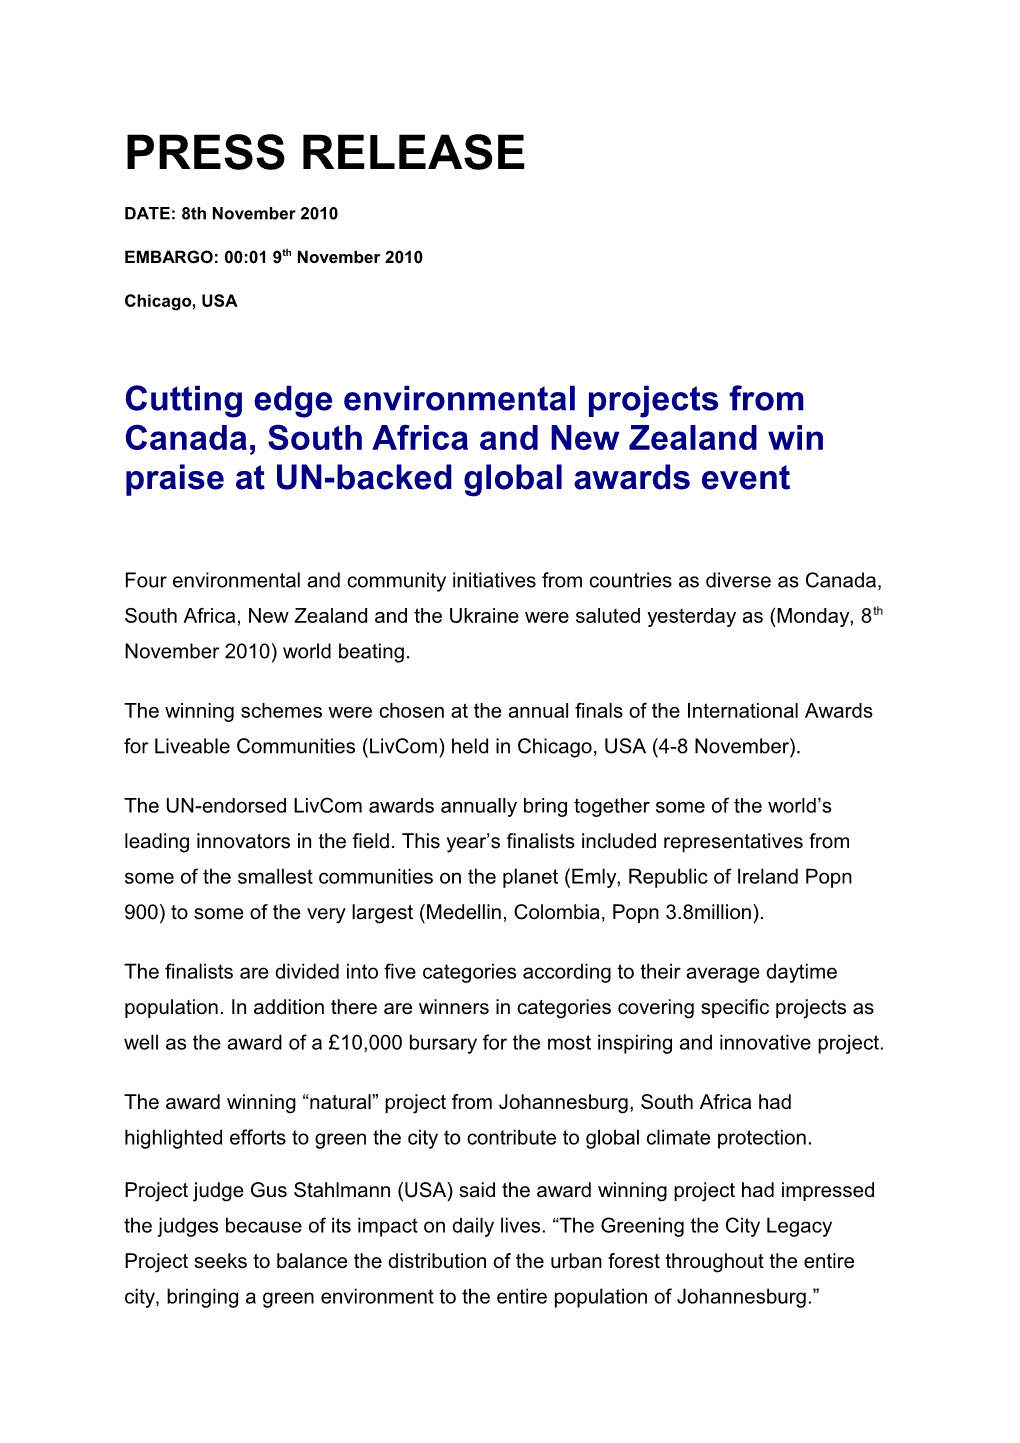 Cutting Edge Environmental Projects from Canada, South Africa and New Zealand Win Praise